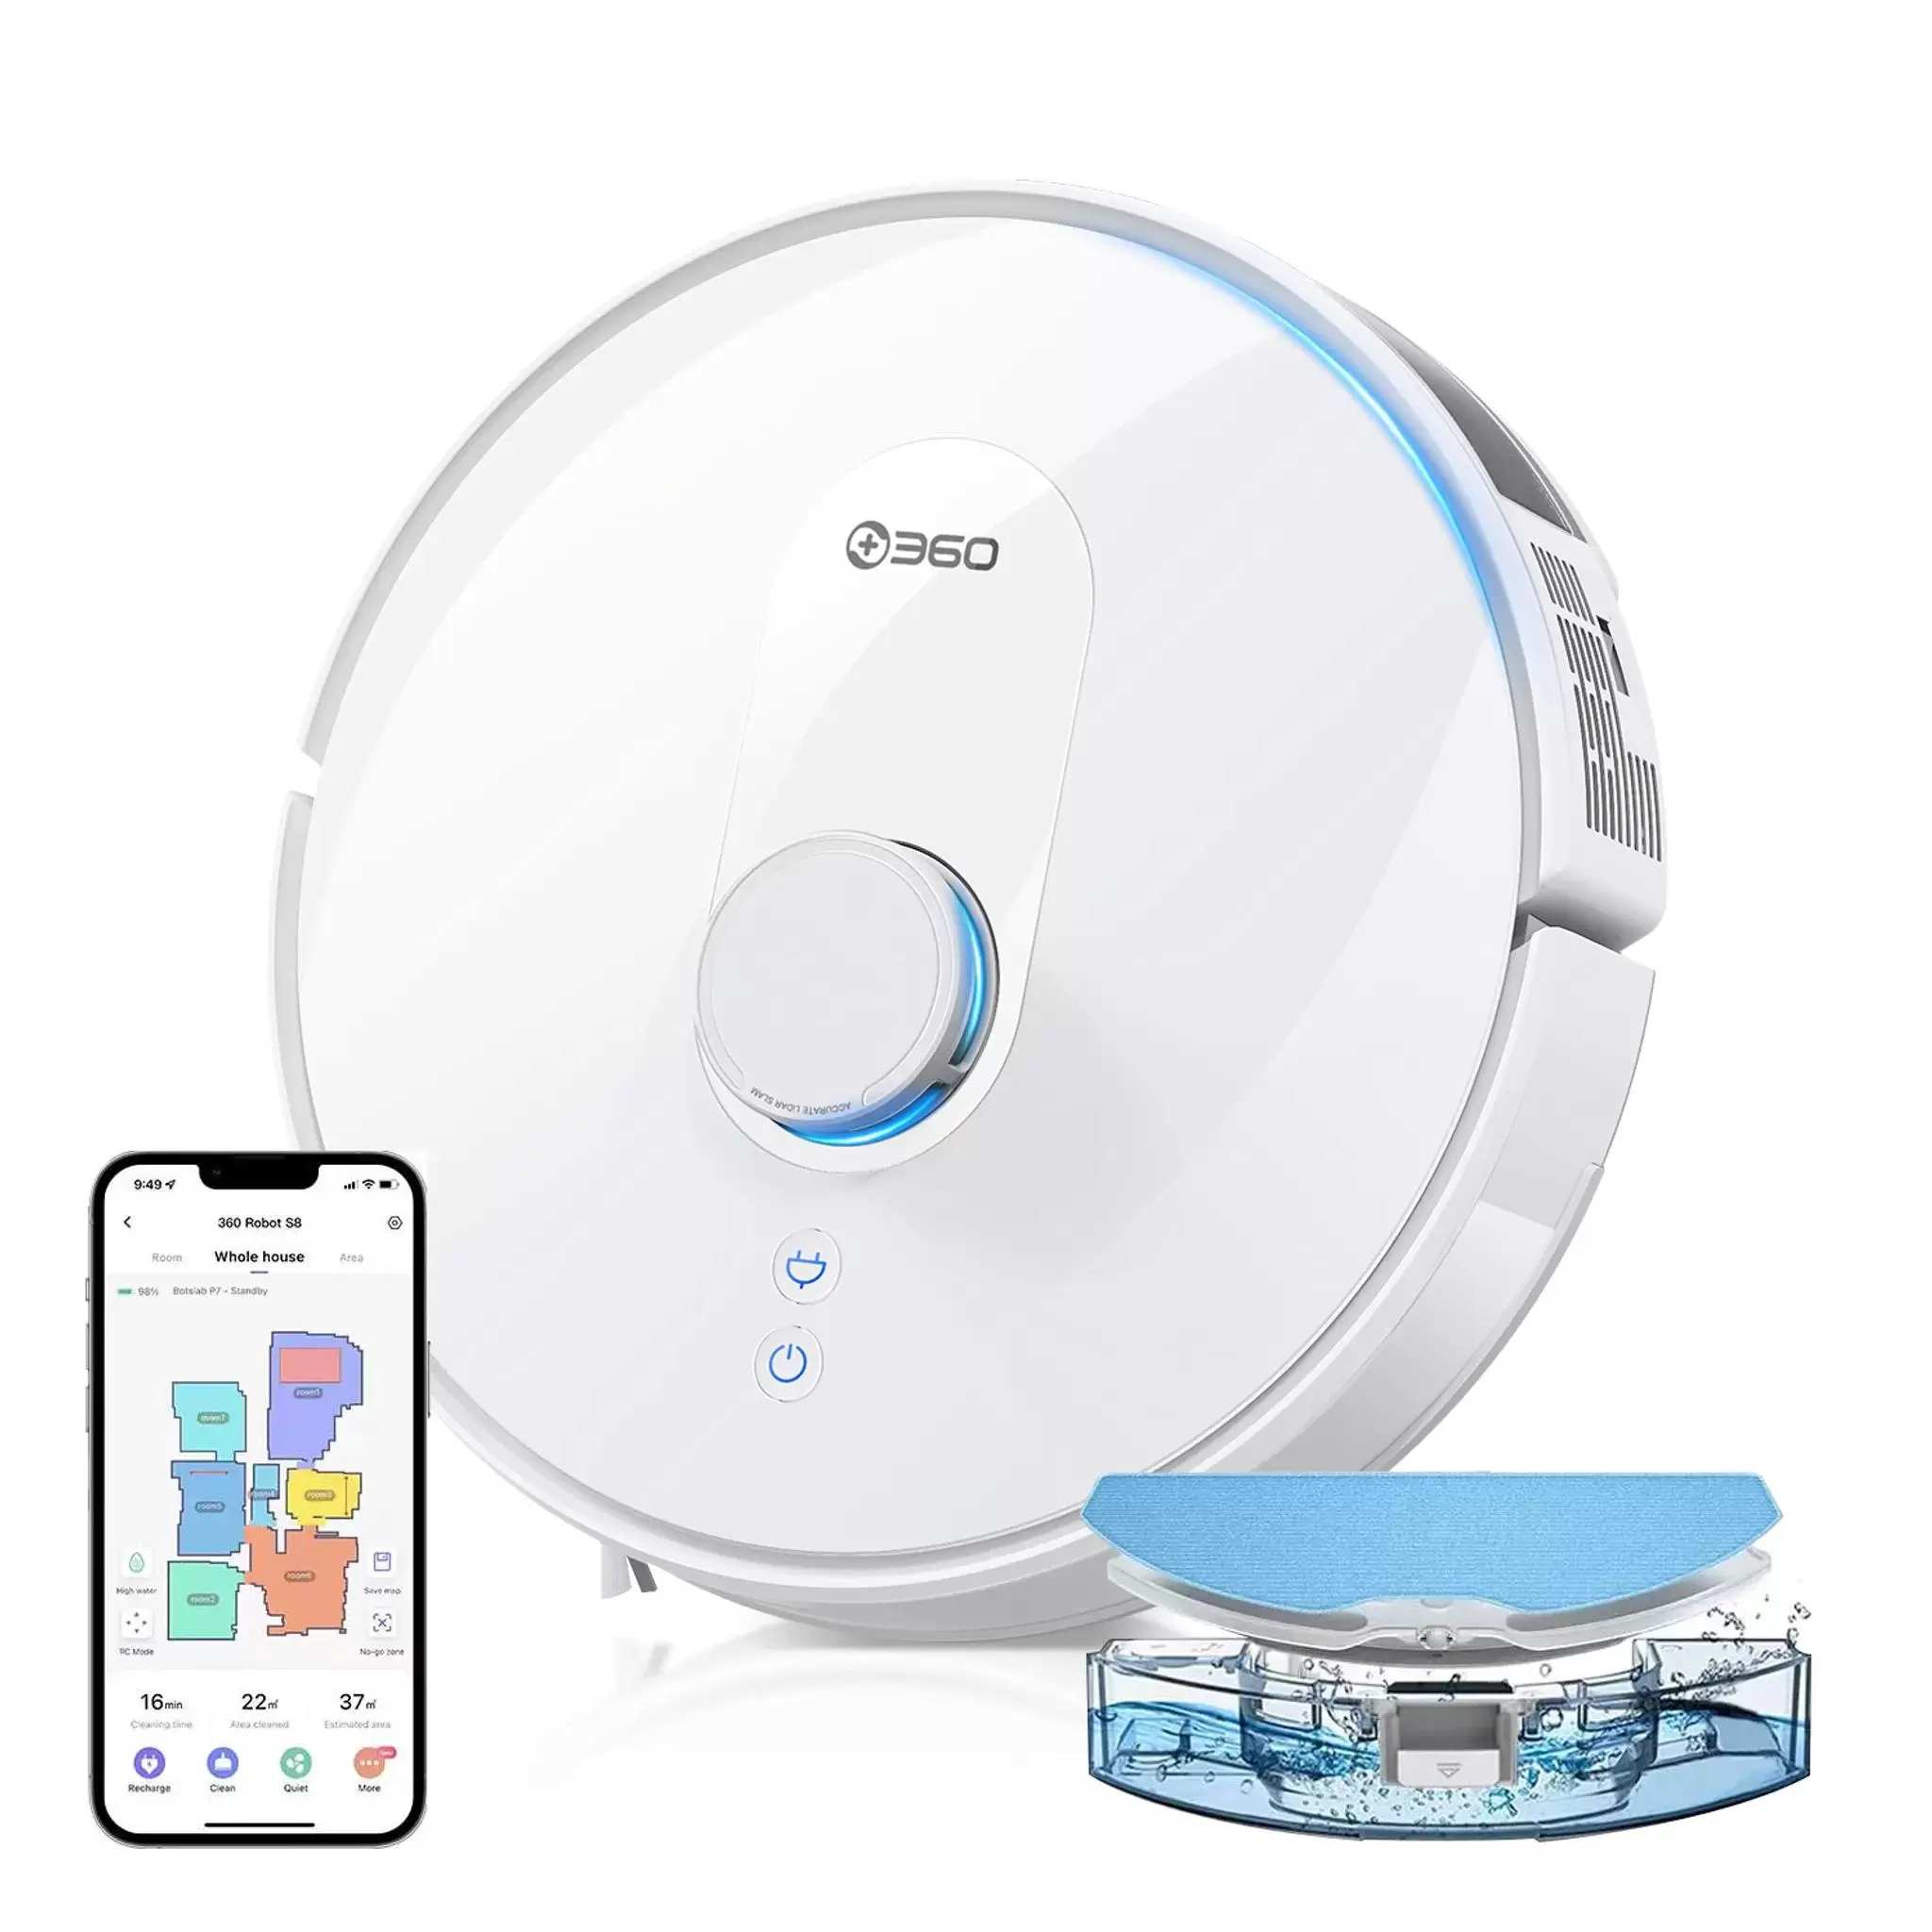 360 S8 Robot Vacuum and Mop Cleaner DHgate Coupon Promo Code